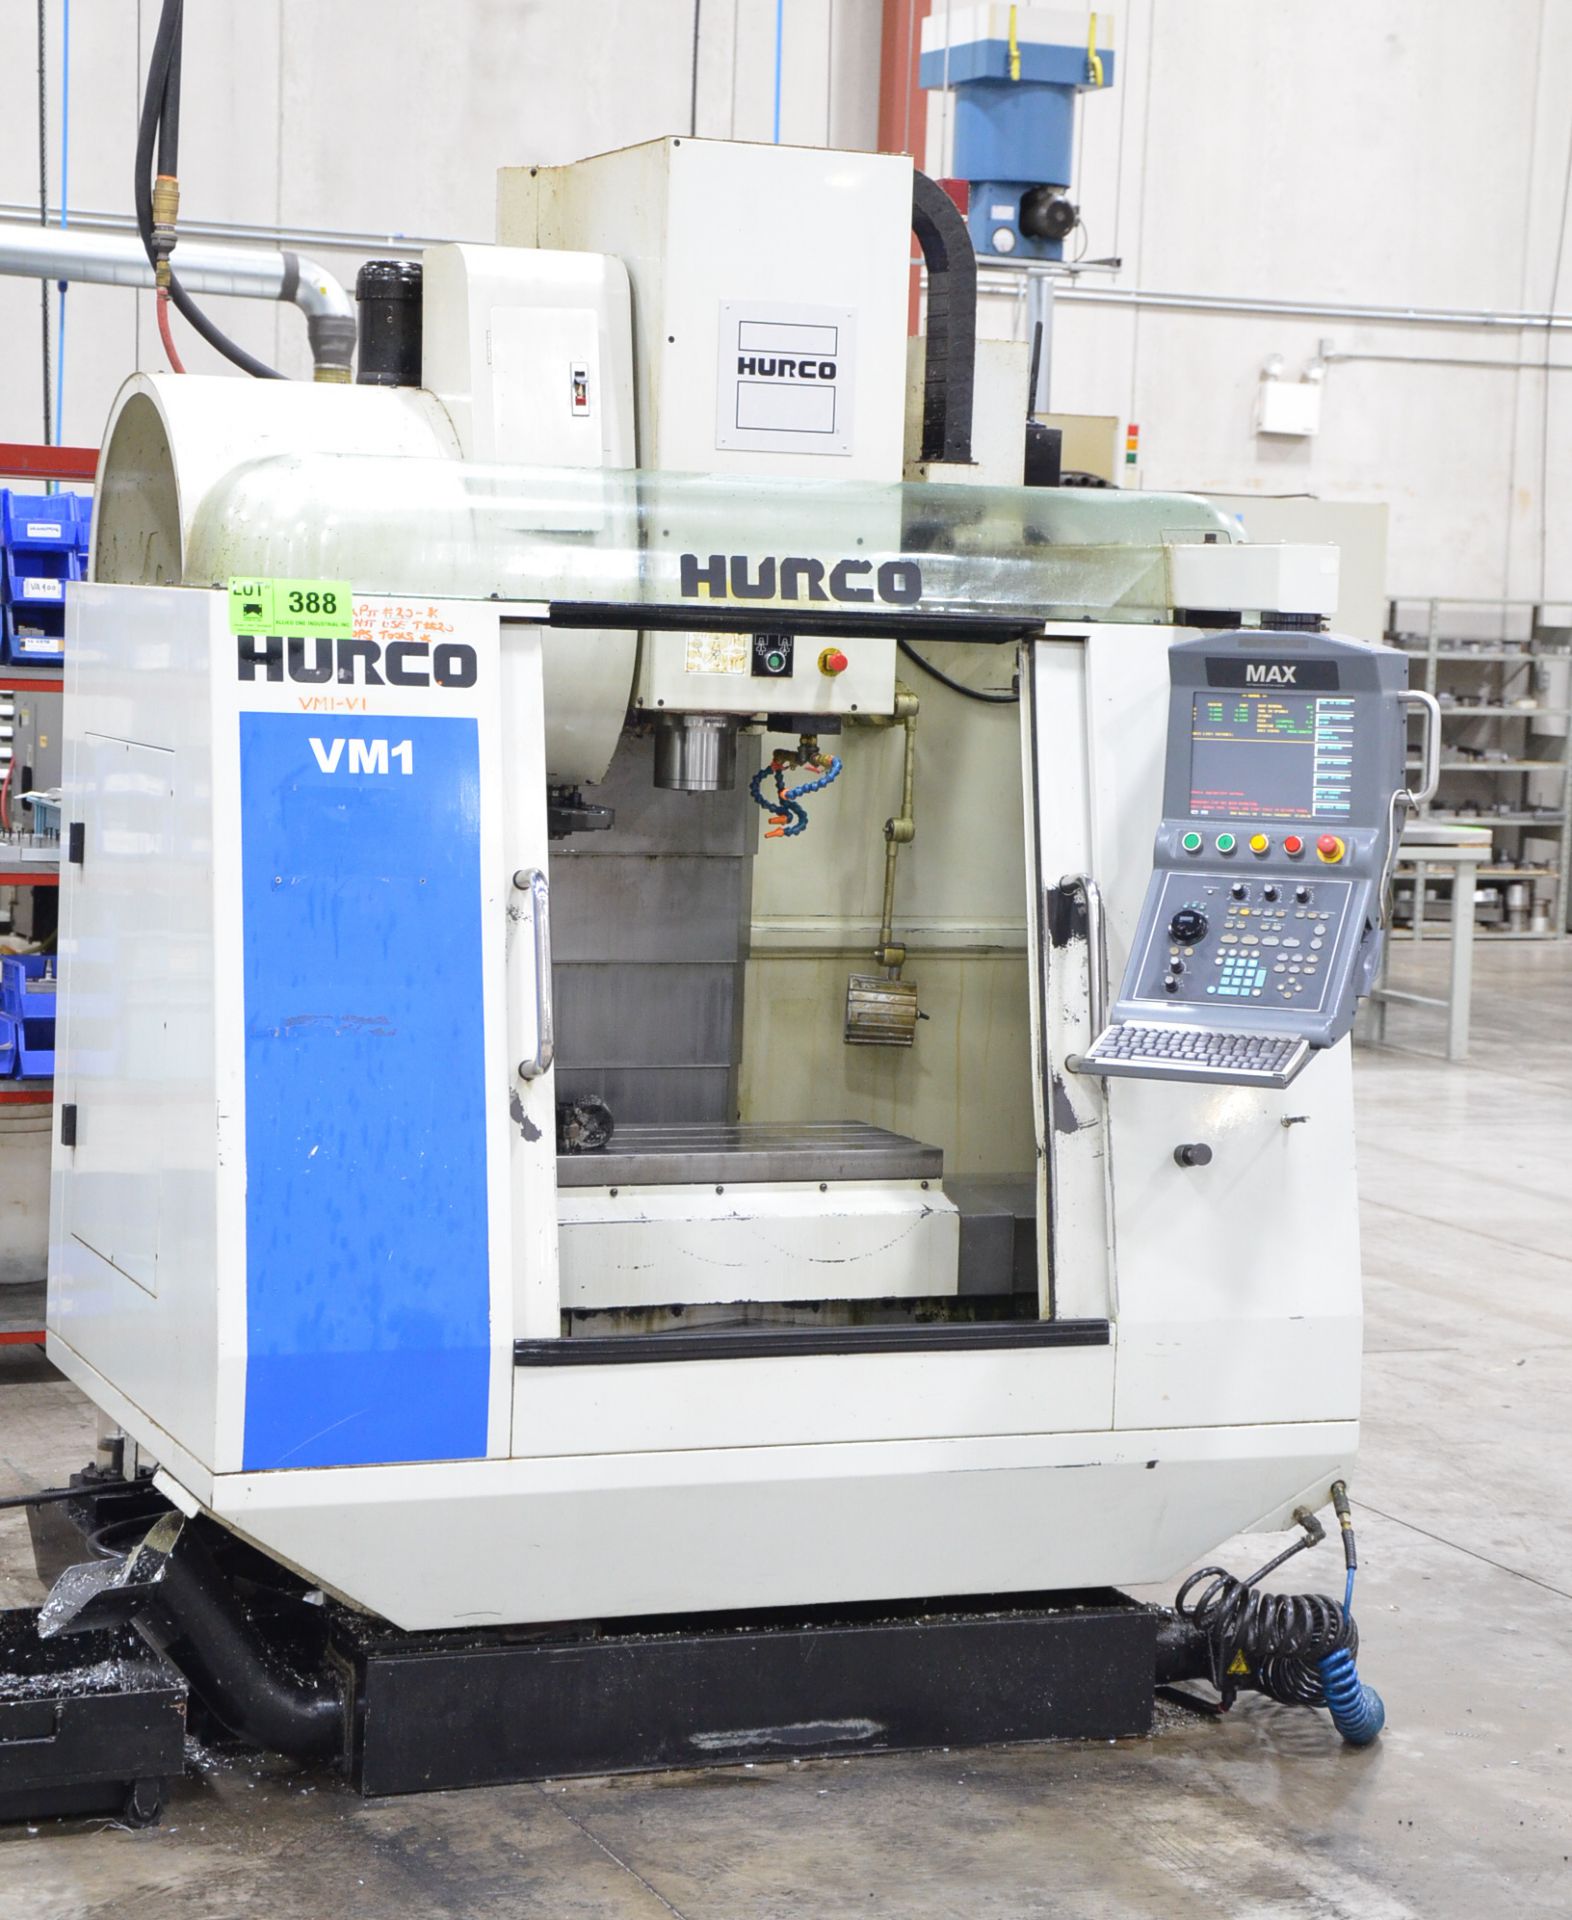 HURCO (2006) VM1 CNC VERTICAL MACHINING CENTER WITH HURCO MAX CNC CONTROL, 14" X 30" TABLE WITH